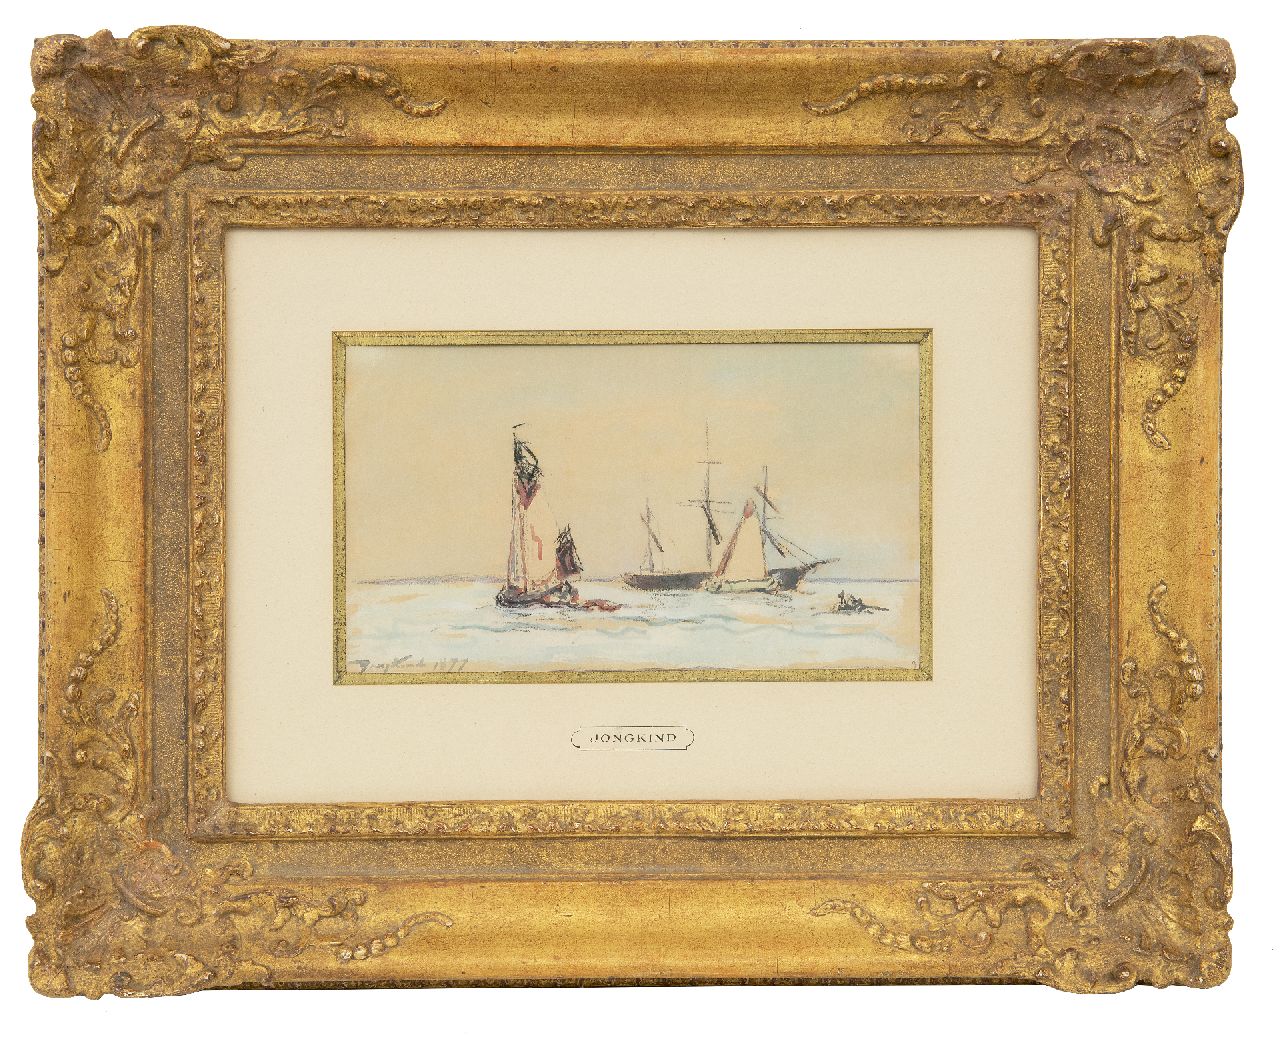 Jongkind J.B.  | Johan Barthold Jongkind, Sailing ships on a river, crayon and watercolour on paper 15.0 x 26.0 cm, signed l.l. and dated 1877